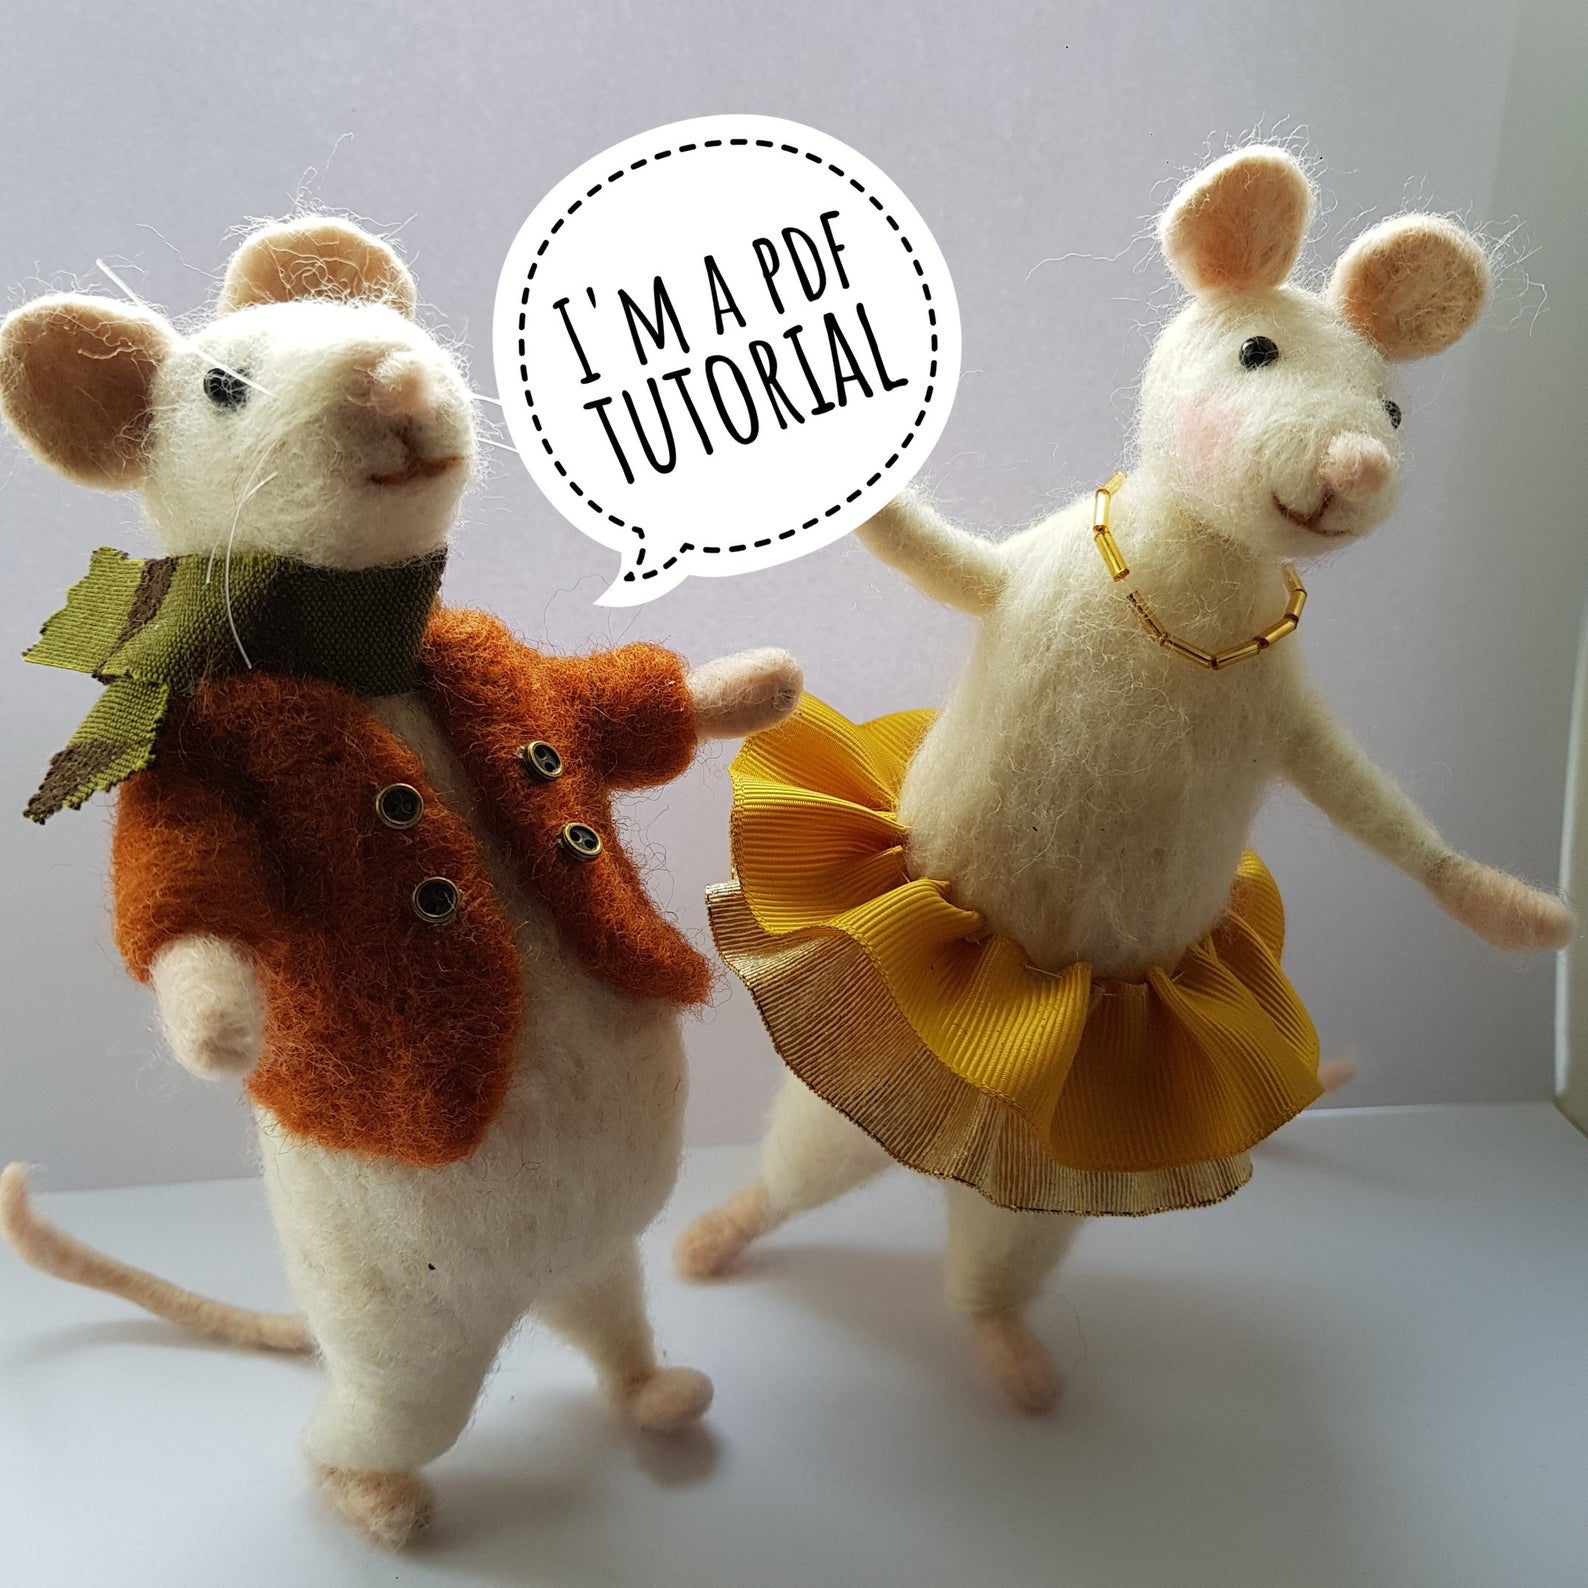 Part 5: Needle felting. Your way to handmade excellence and a world of DIY